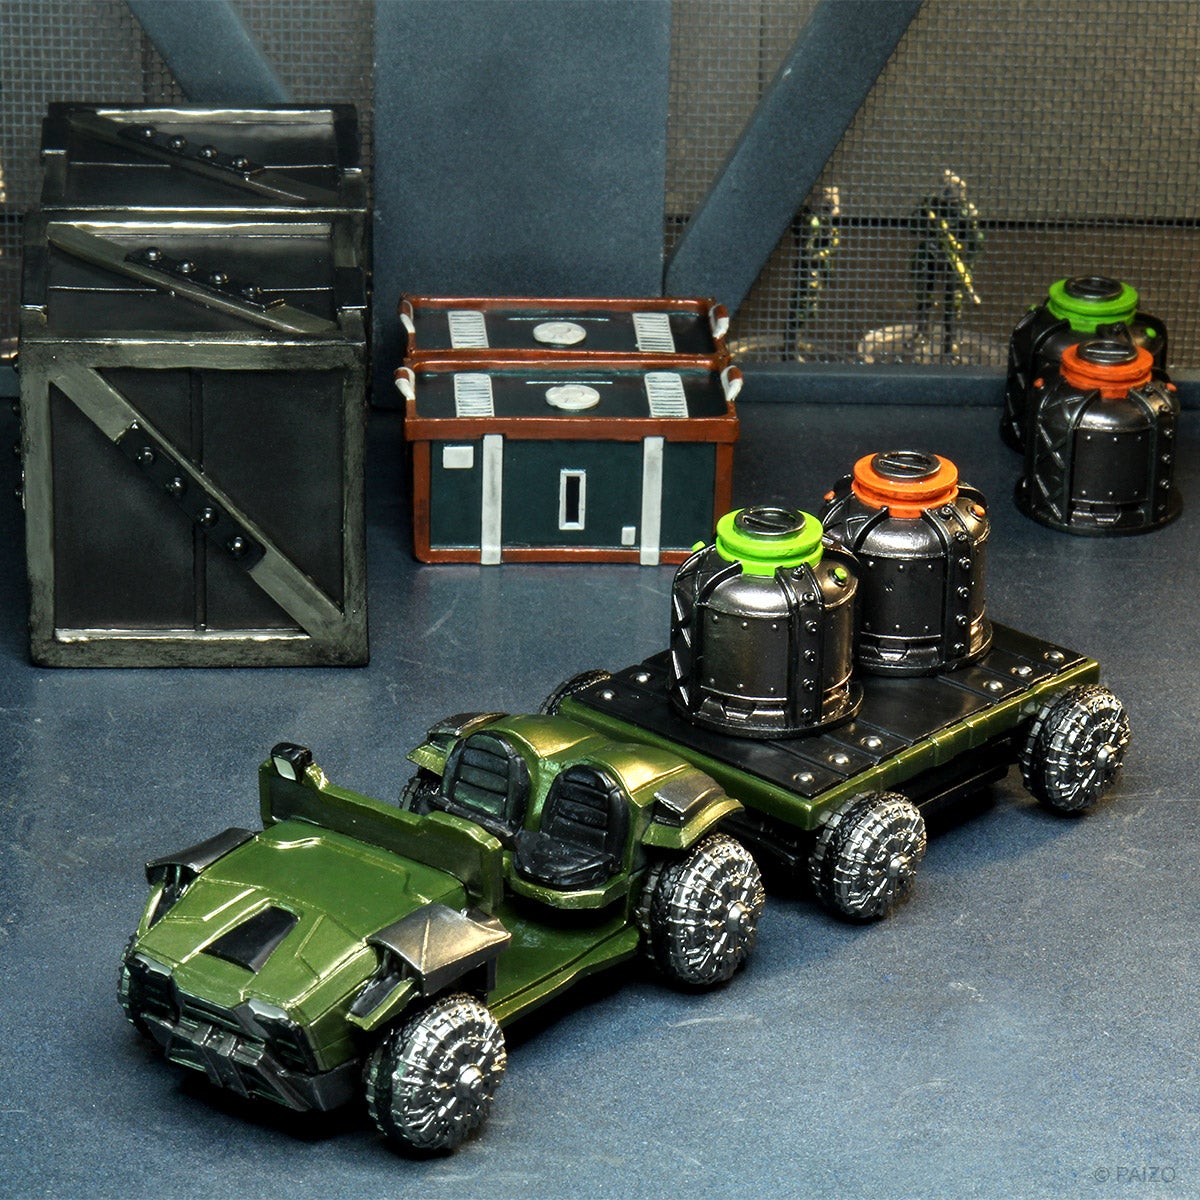 Mini figures set in a docking bay scene, featuring a transport vehicle towing two large bins